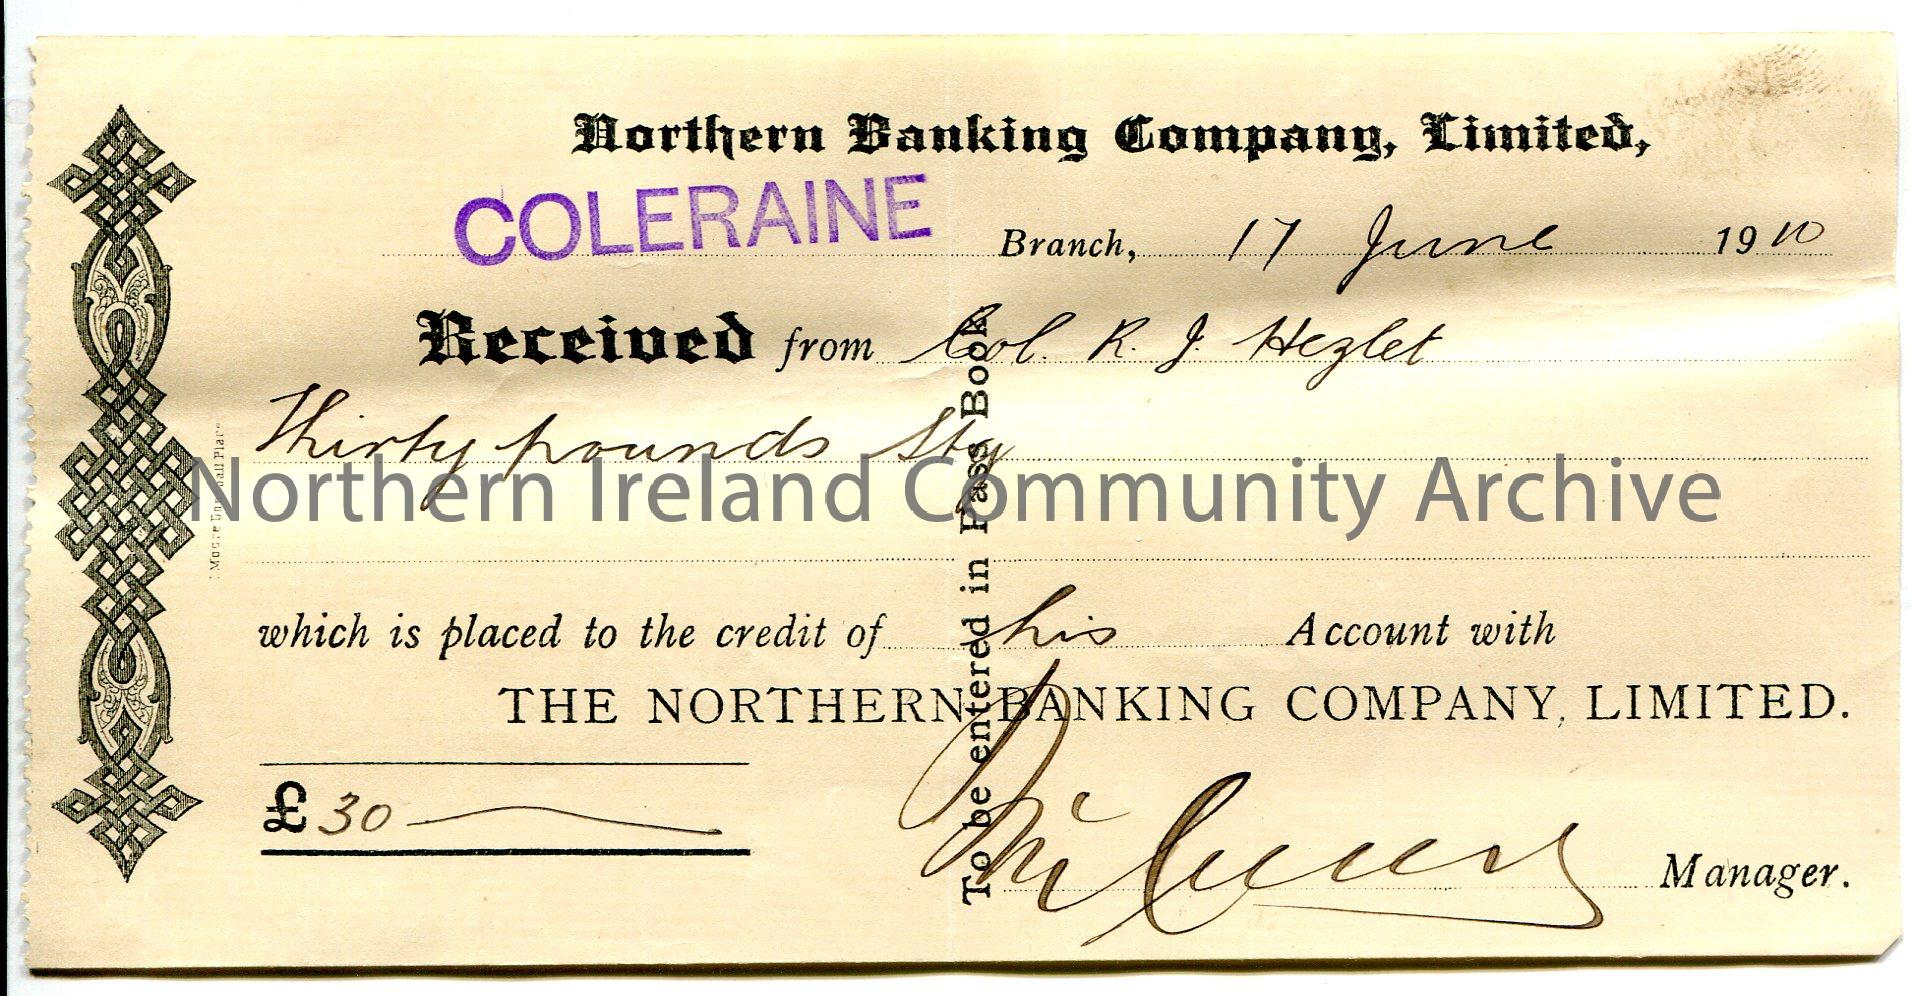 Handwritten receipt from Northern Banking Company, Limited, Coleraine branch for the credit of £30.0.0 in to the account of Col R J Hezlet. Signe…